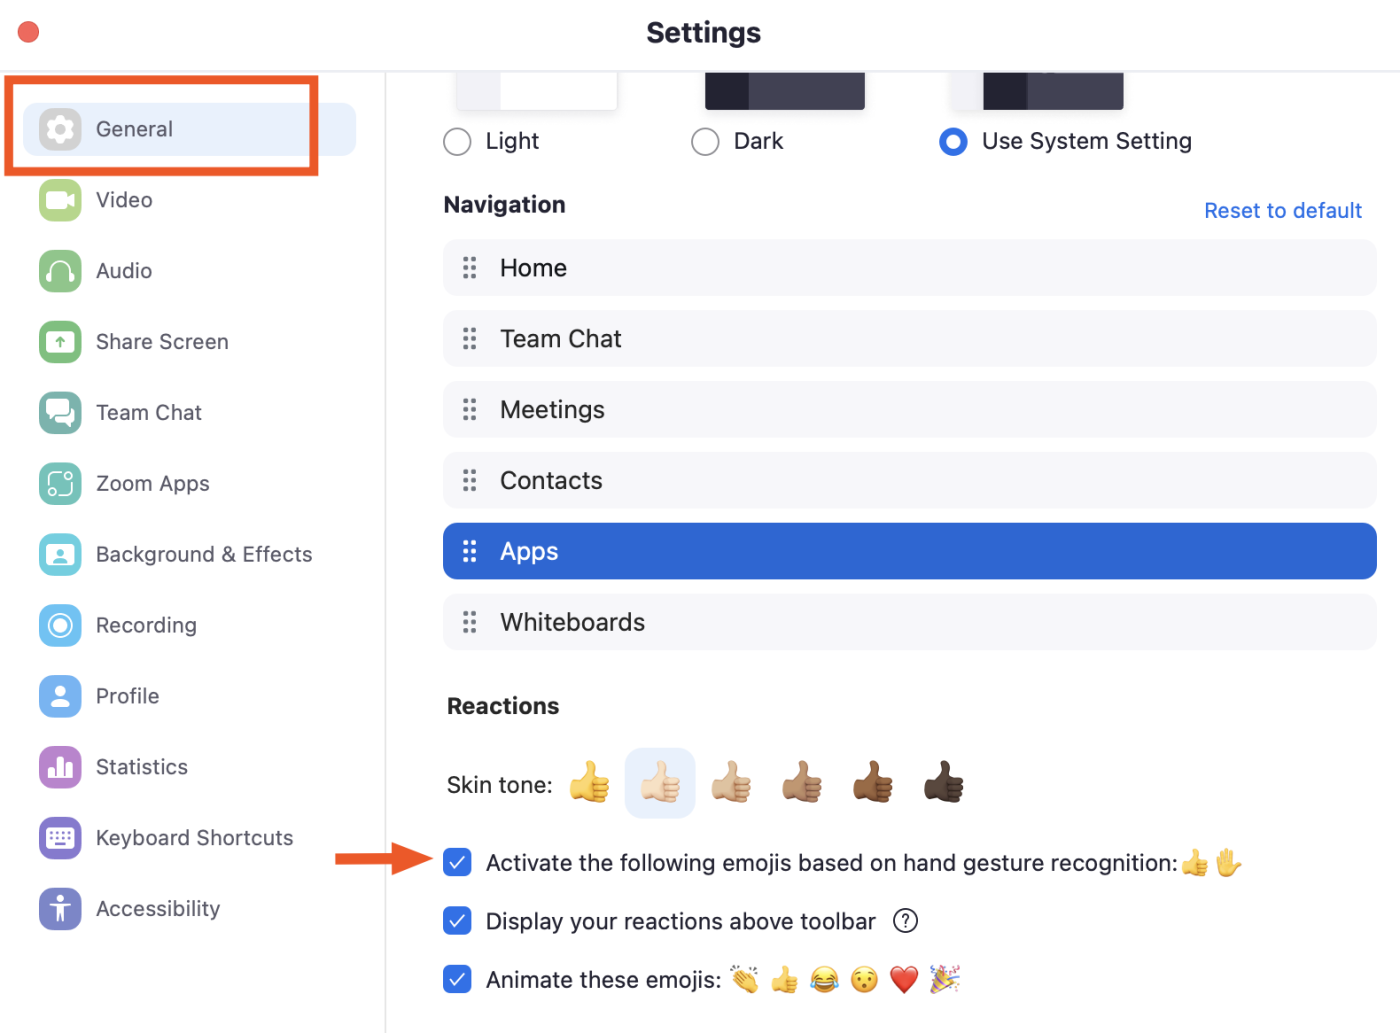 General tab of Zoom settings in Zoom Desktop Client. The option "Activate the following emojis based on hand gesture recognition thumbs up and raised hand" is selected.